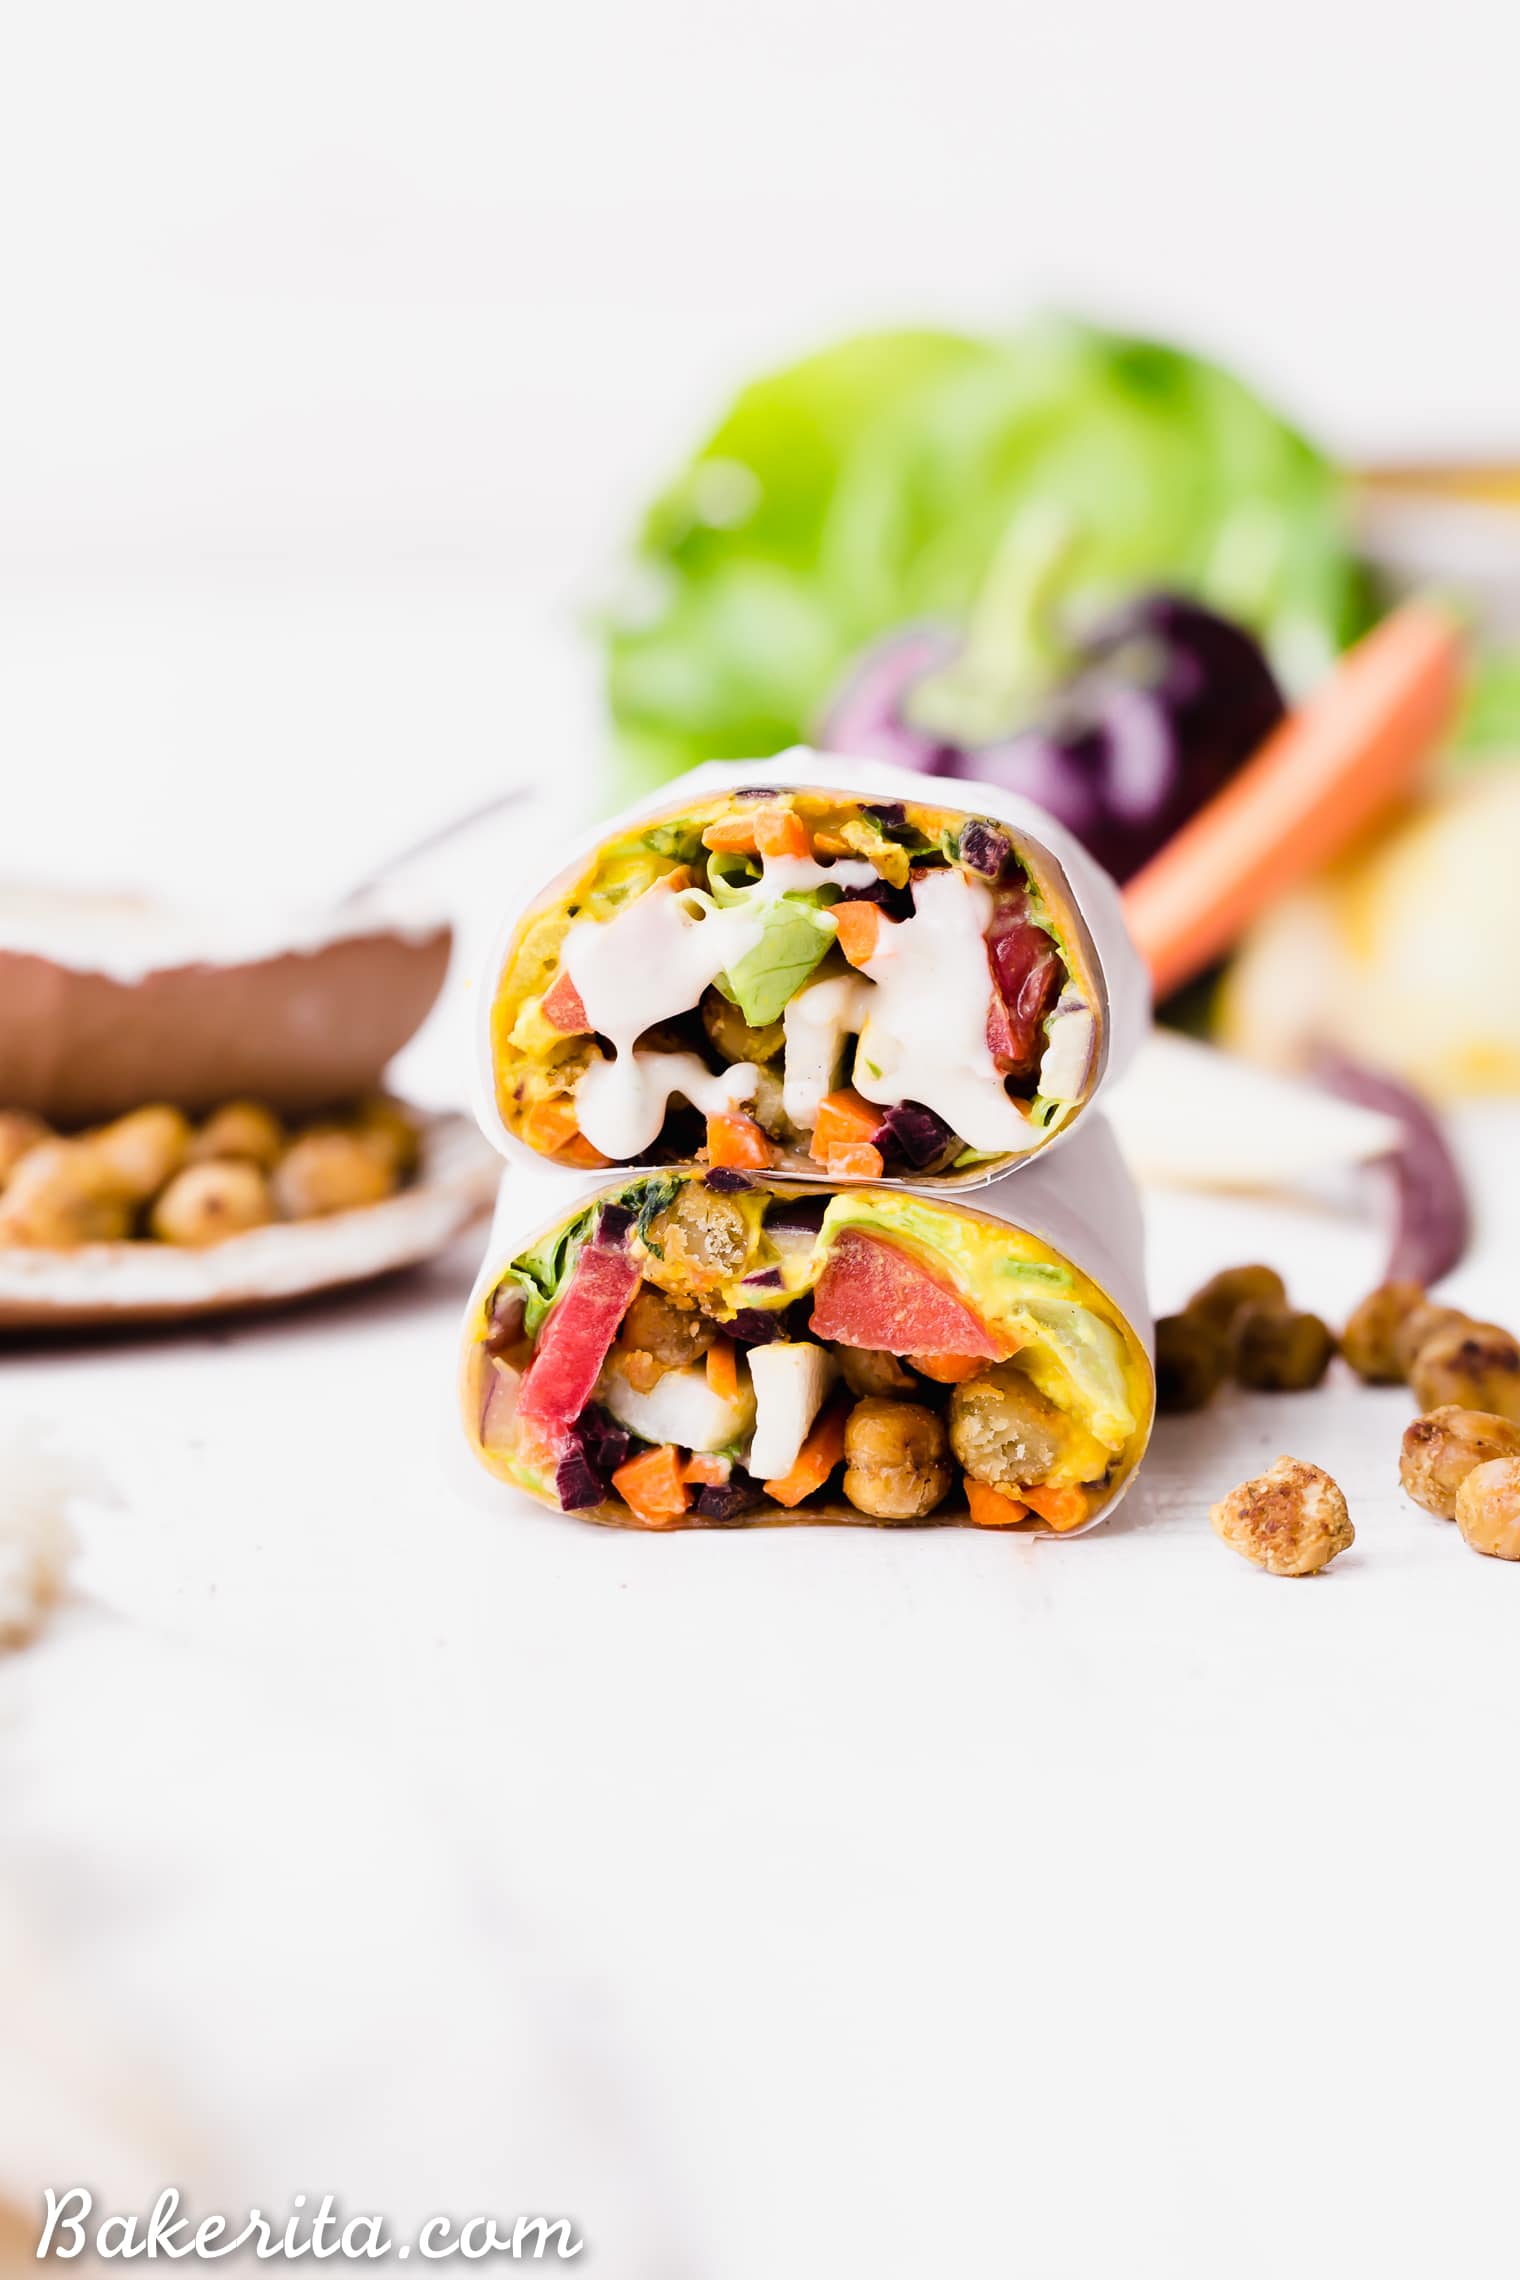 These Roasted Chickpea Veggie Wraps are a delicious gluten-free and vegan lunch or dinner that you can make ahead of time. They have a wonderful Turmeric Hummus spread inside and a Tahini Dressing/Dipping Sauce to serve with!